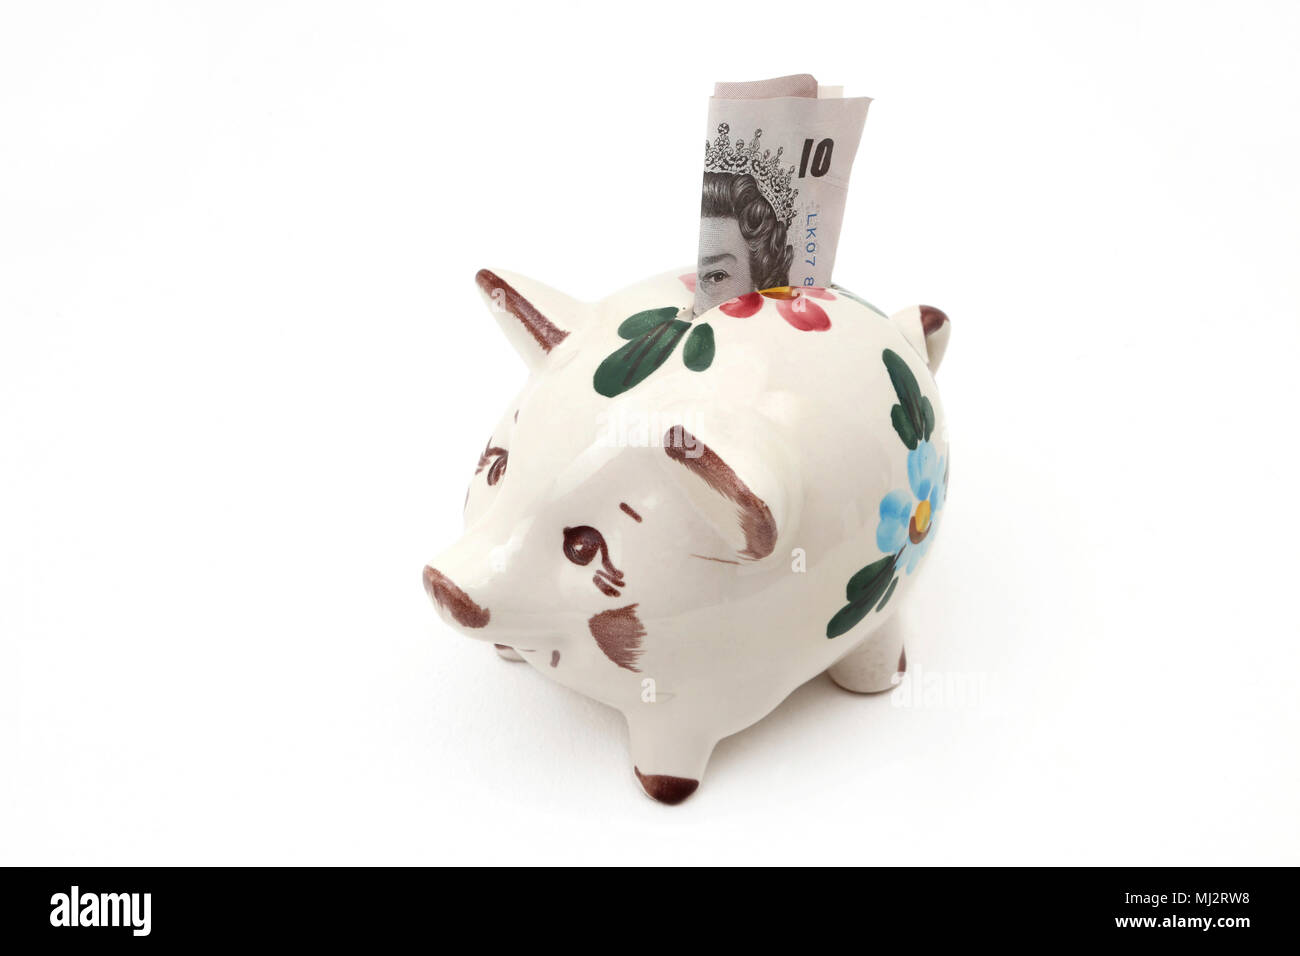 Piggy Bank Money Box with Old Ten Pound Note out of Circulation in 2017 Stock Photo